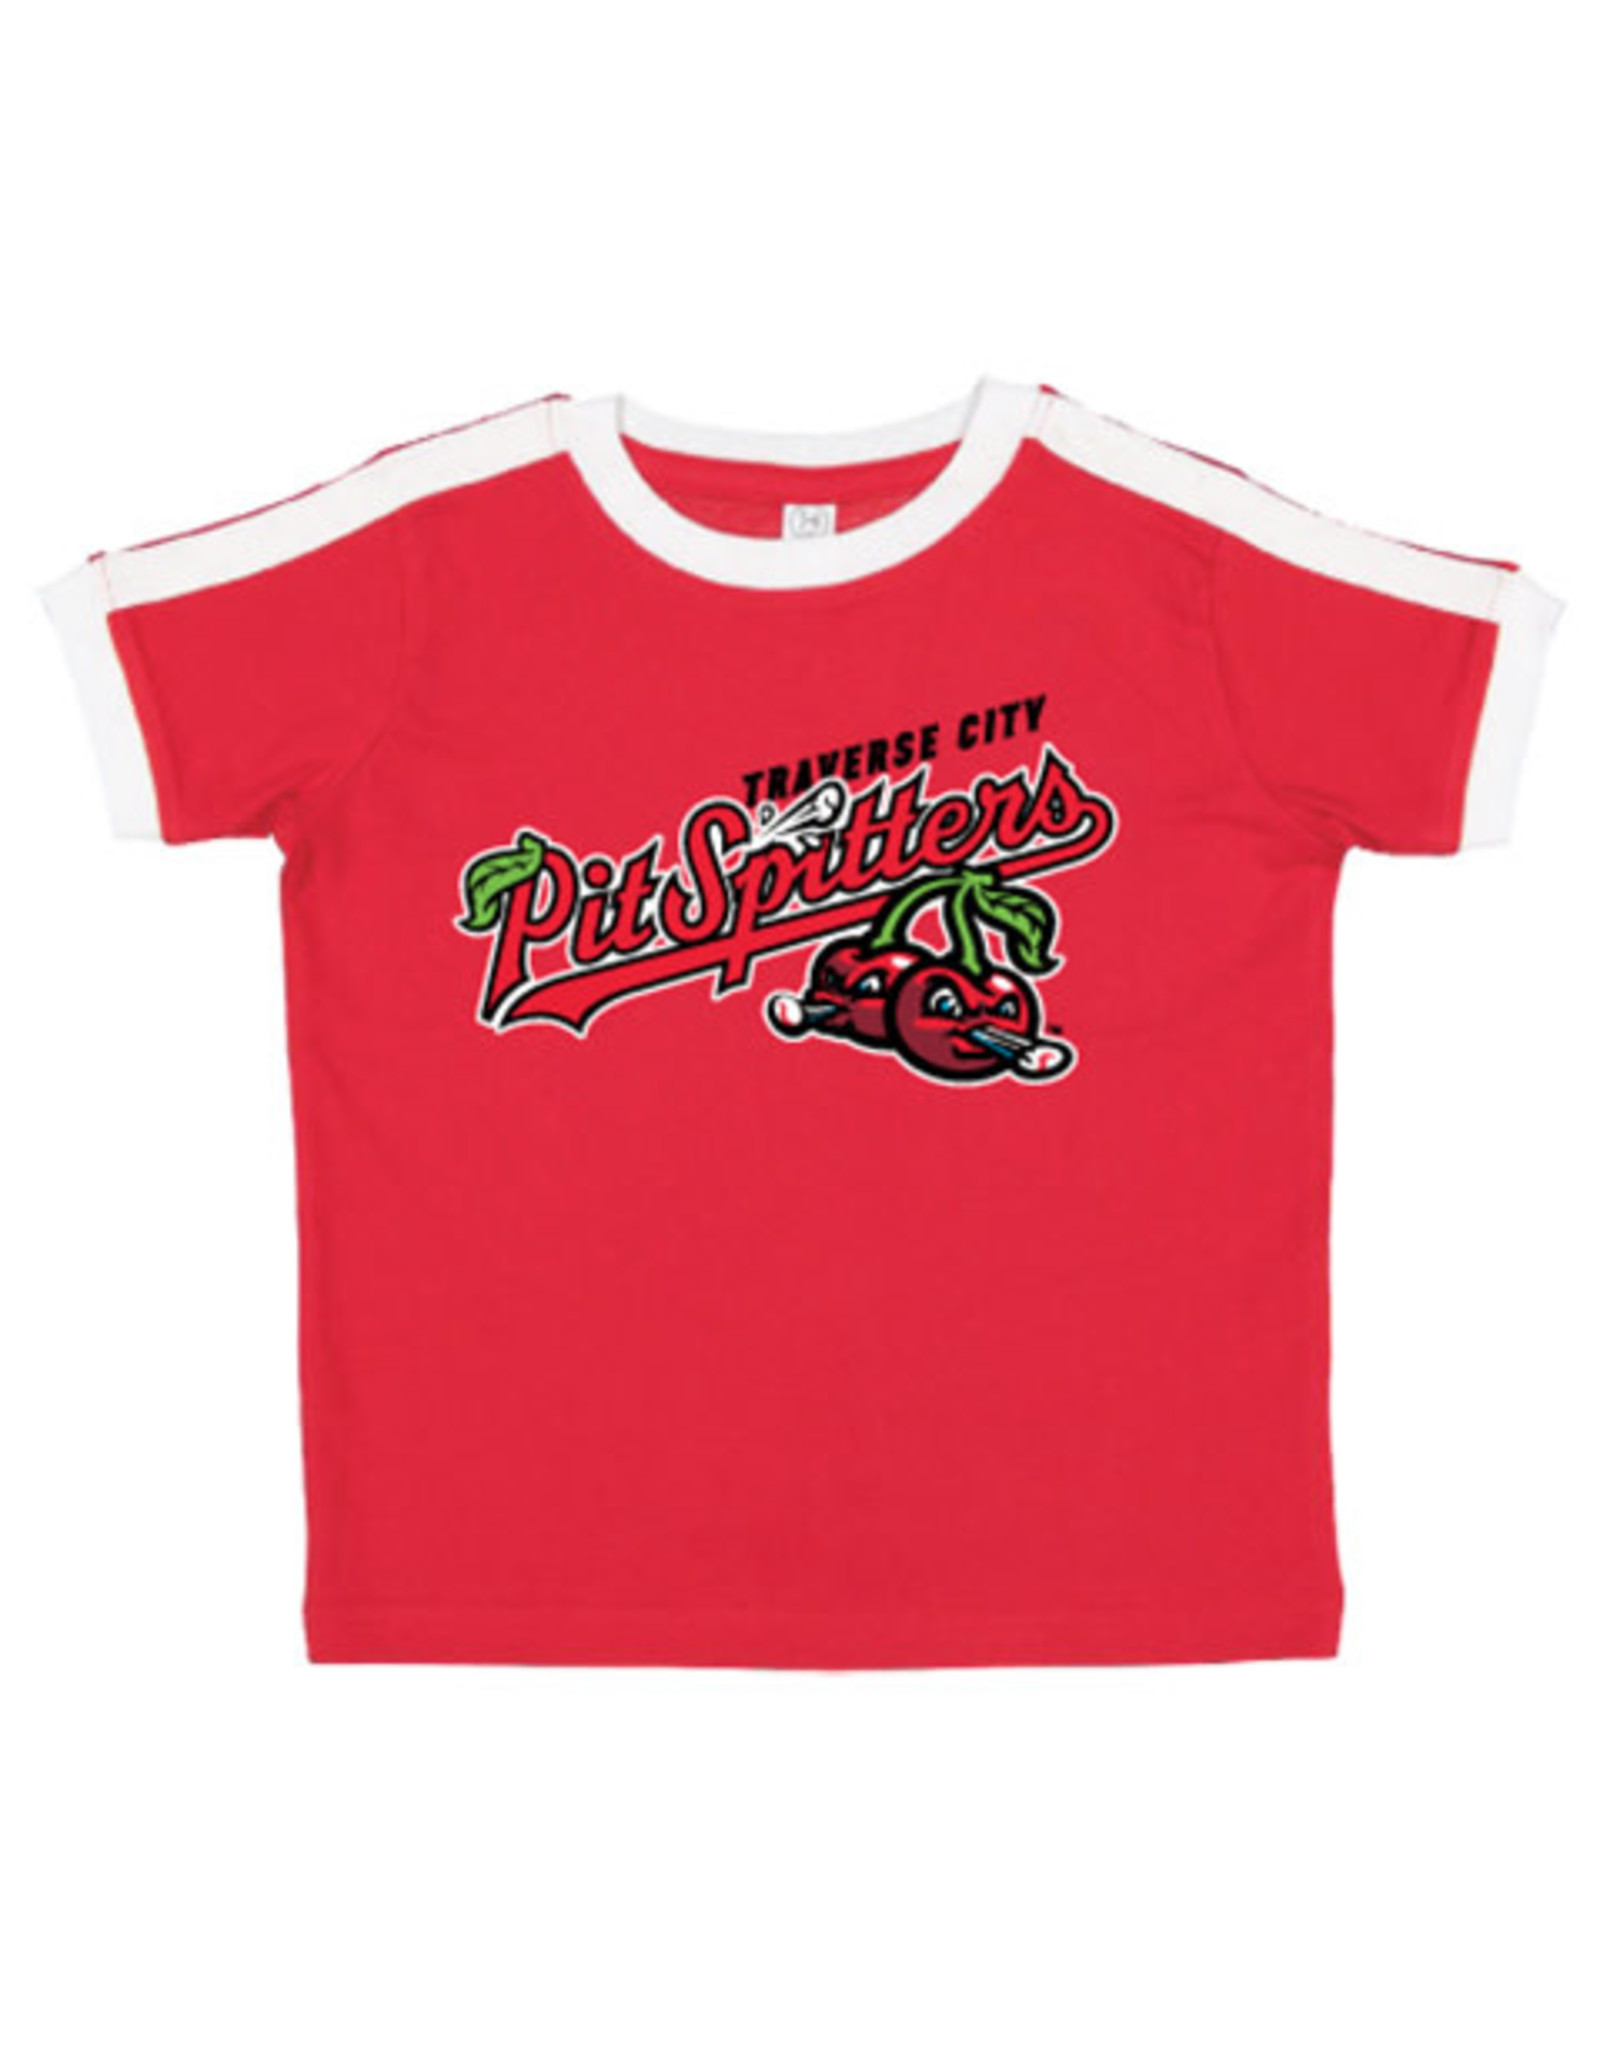 2929 Toddler Red/White Ringer Tee - Traverse City Pit Spitters